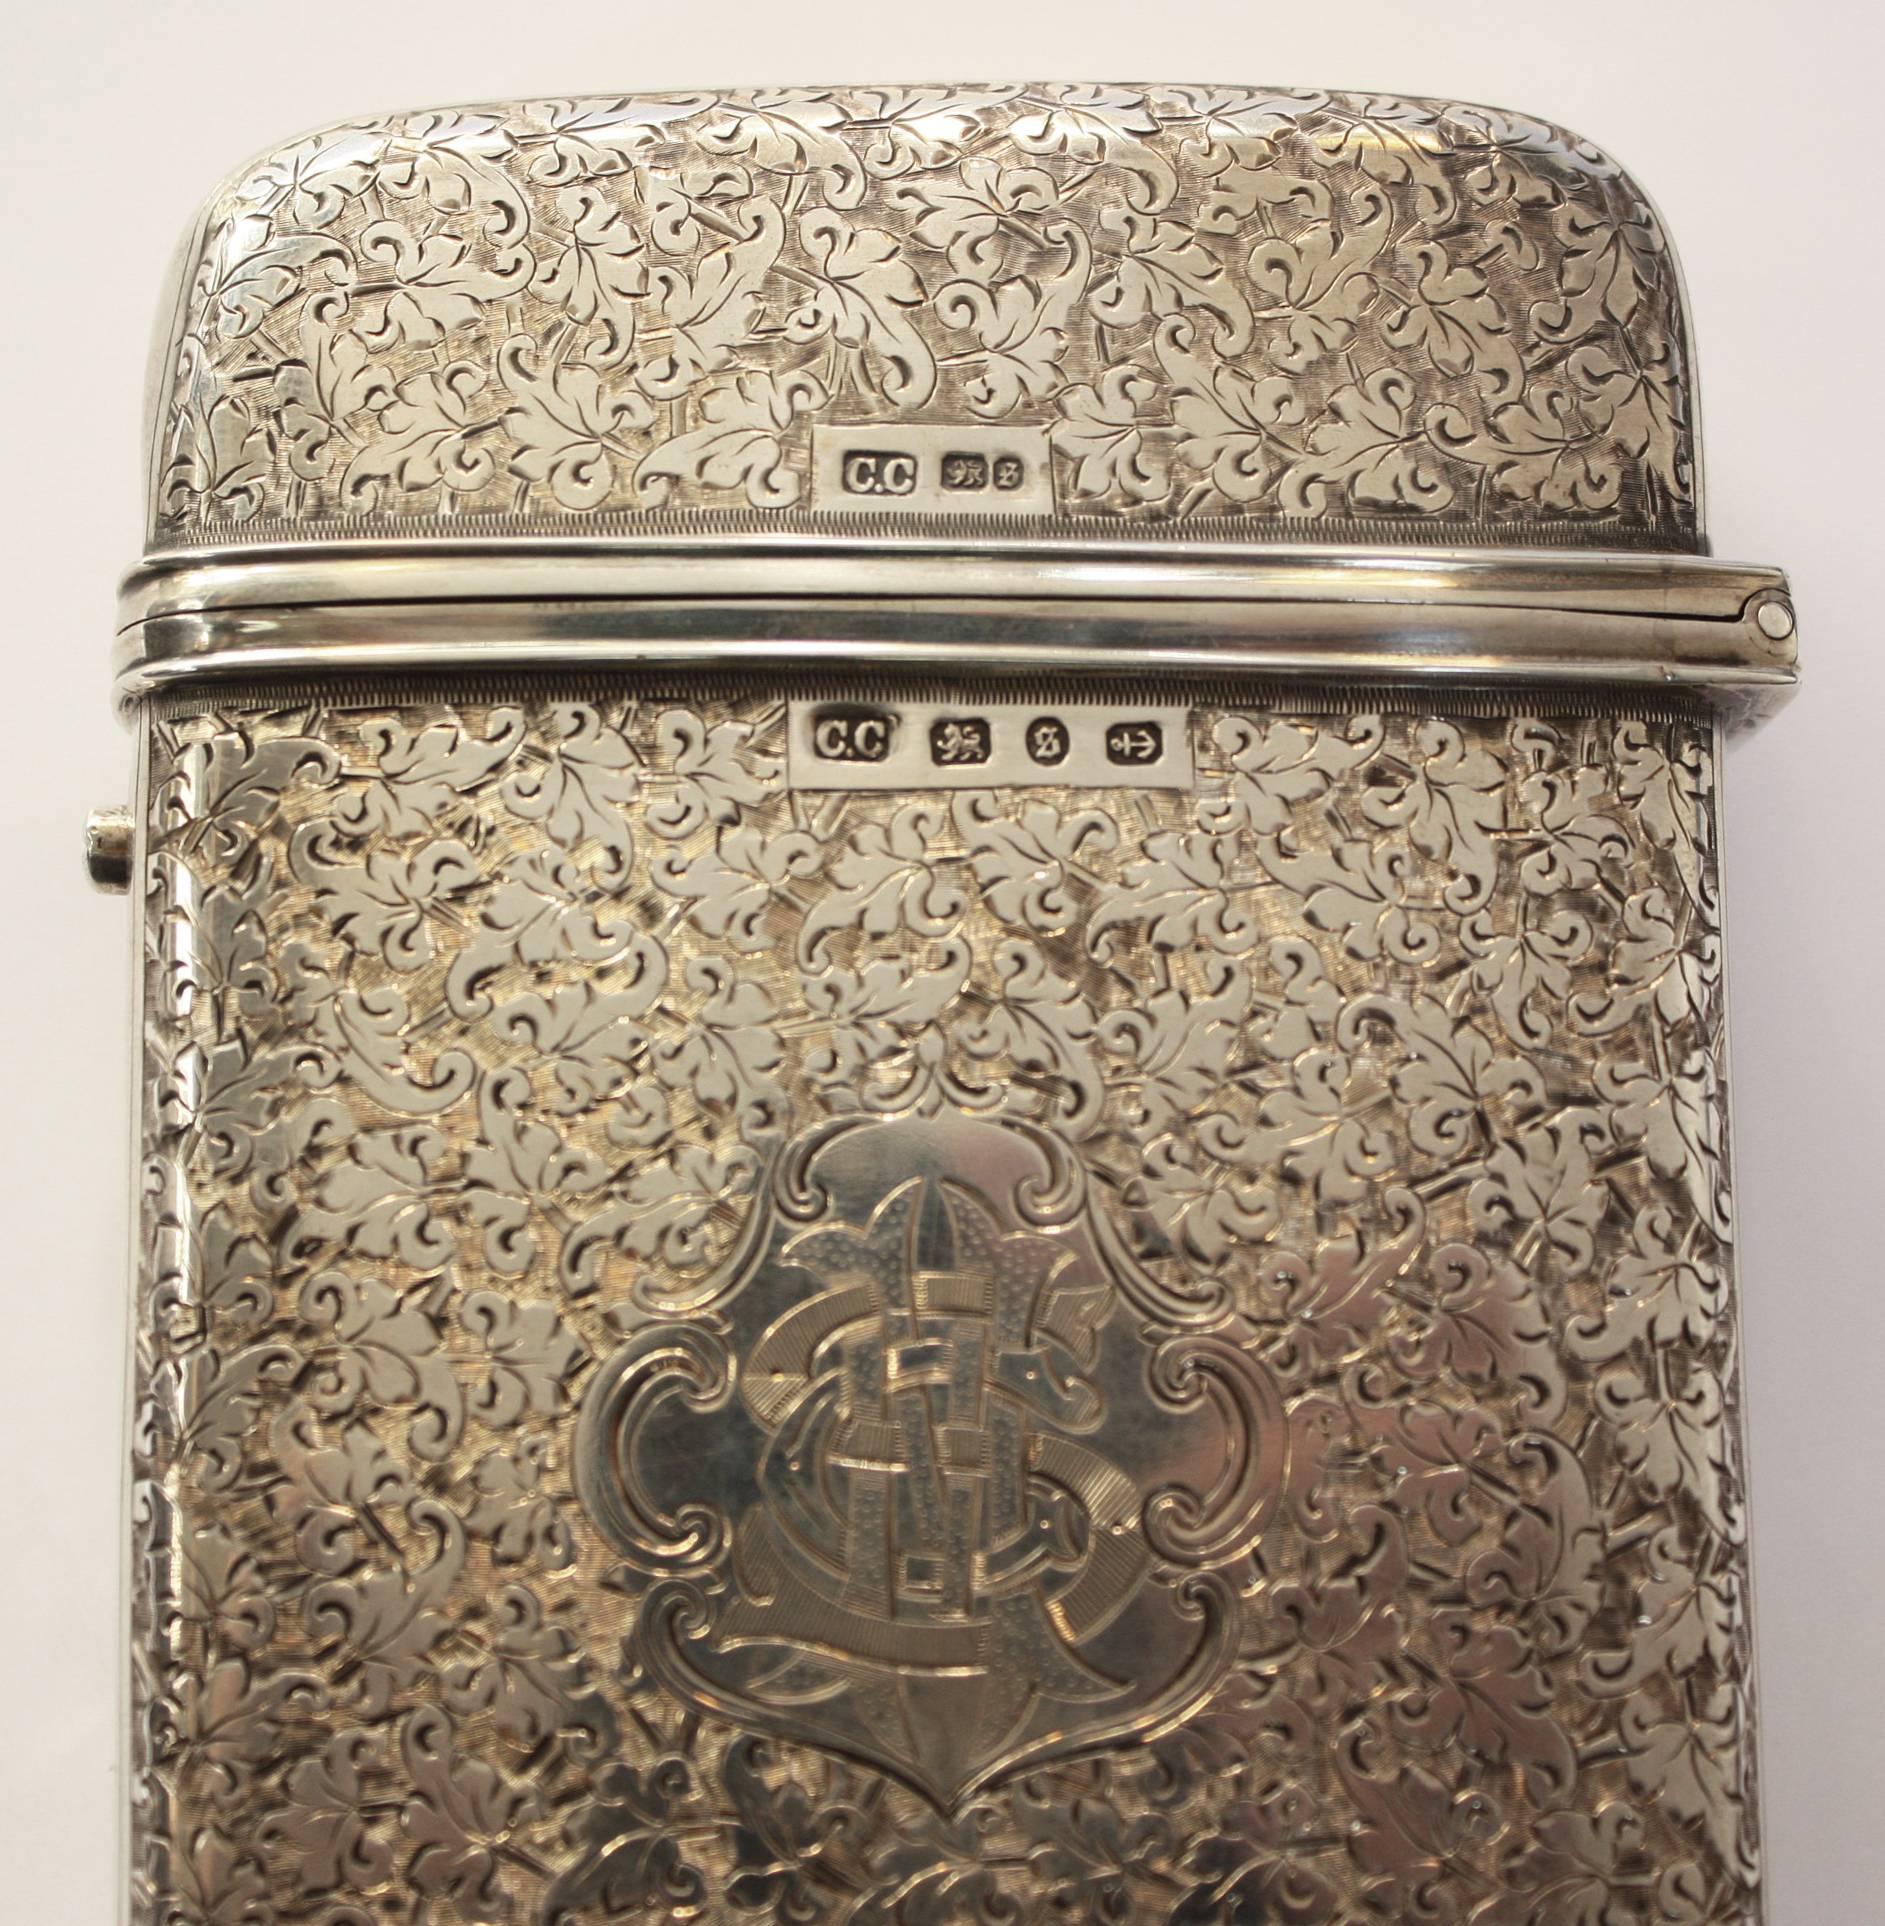 A rare, large and heavy sterling silver English cigar case with overall floral design and chained bellflower motif along the sides.

Monogramed on top and marked with hallmarks for Birmingham, England, 1892, by silversmiths Colen Hewer Cheshire.